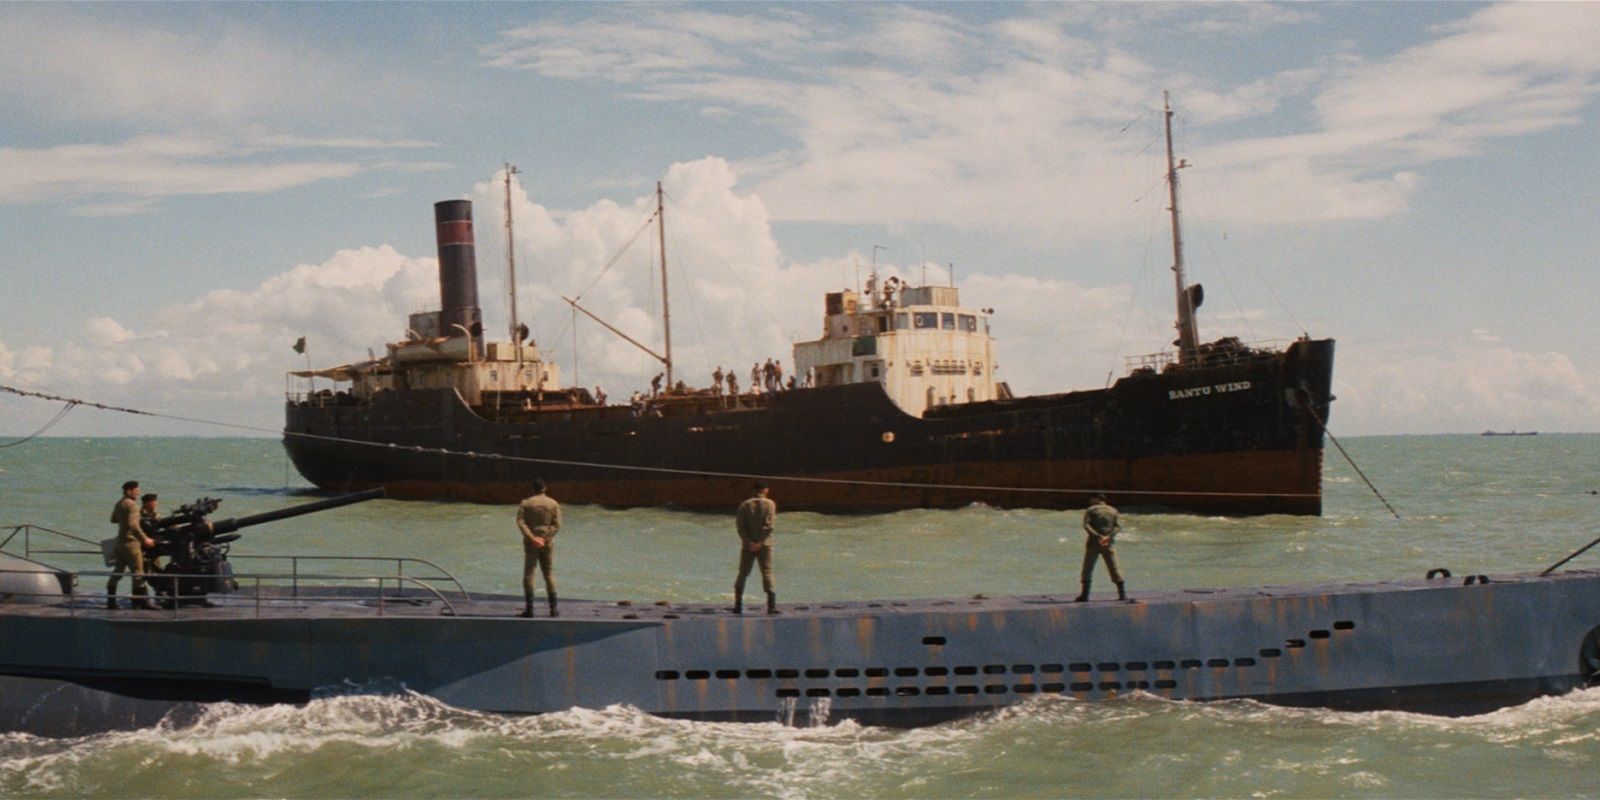 The_German_sub_and_the_cargo_ship_in_Raiders_of_the_Lost_Ark